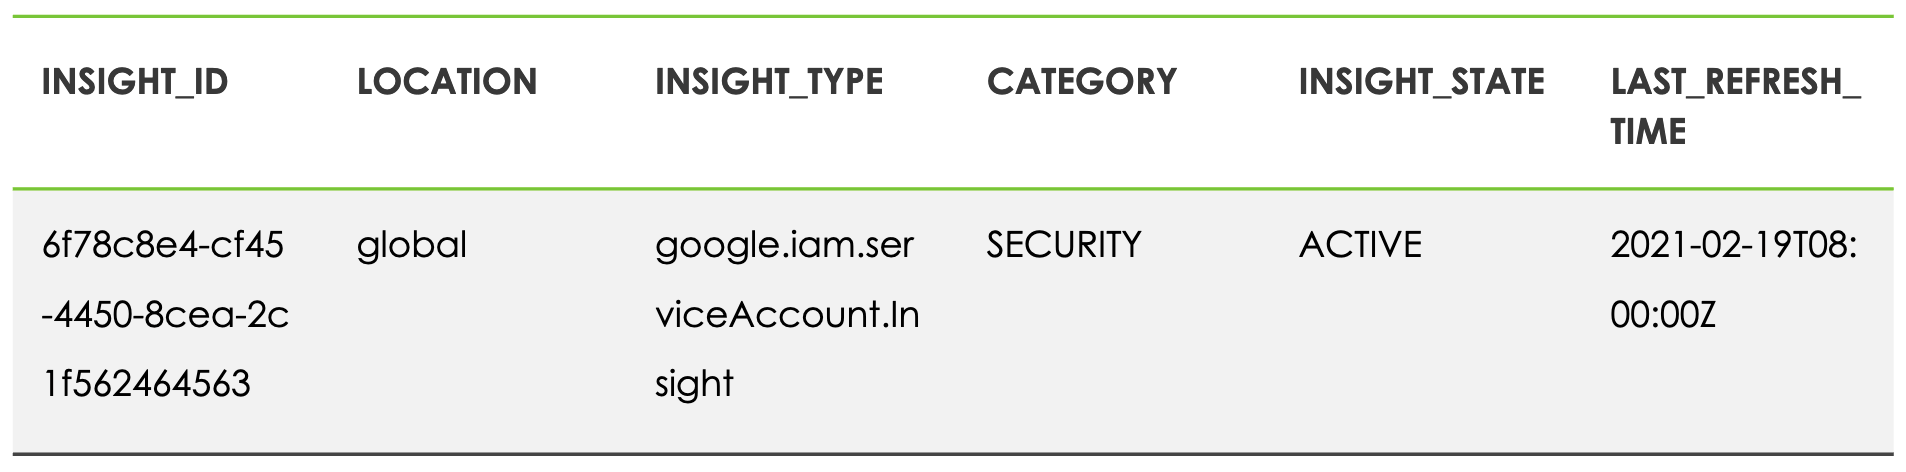 Service Account Insights